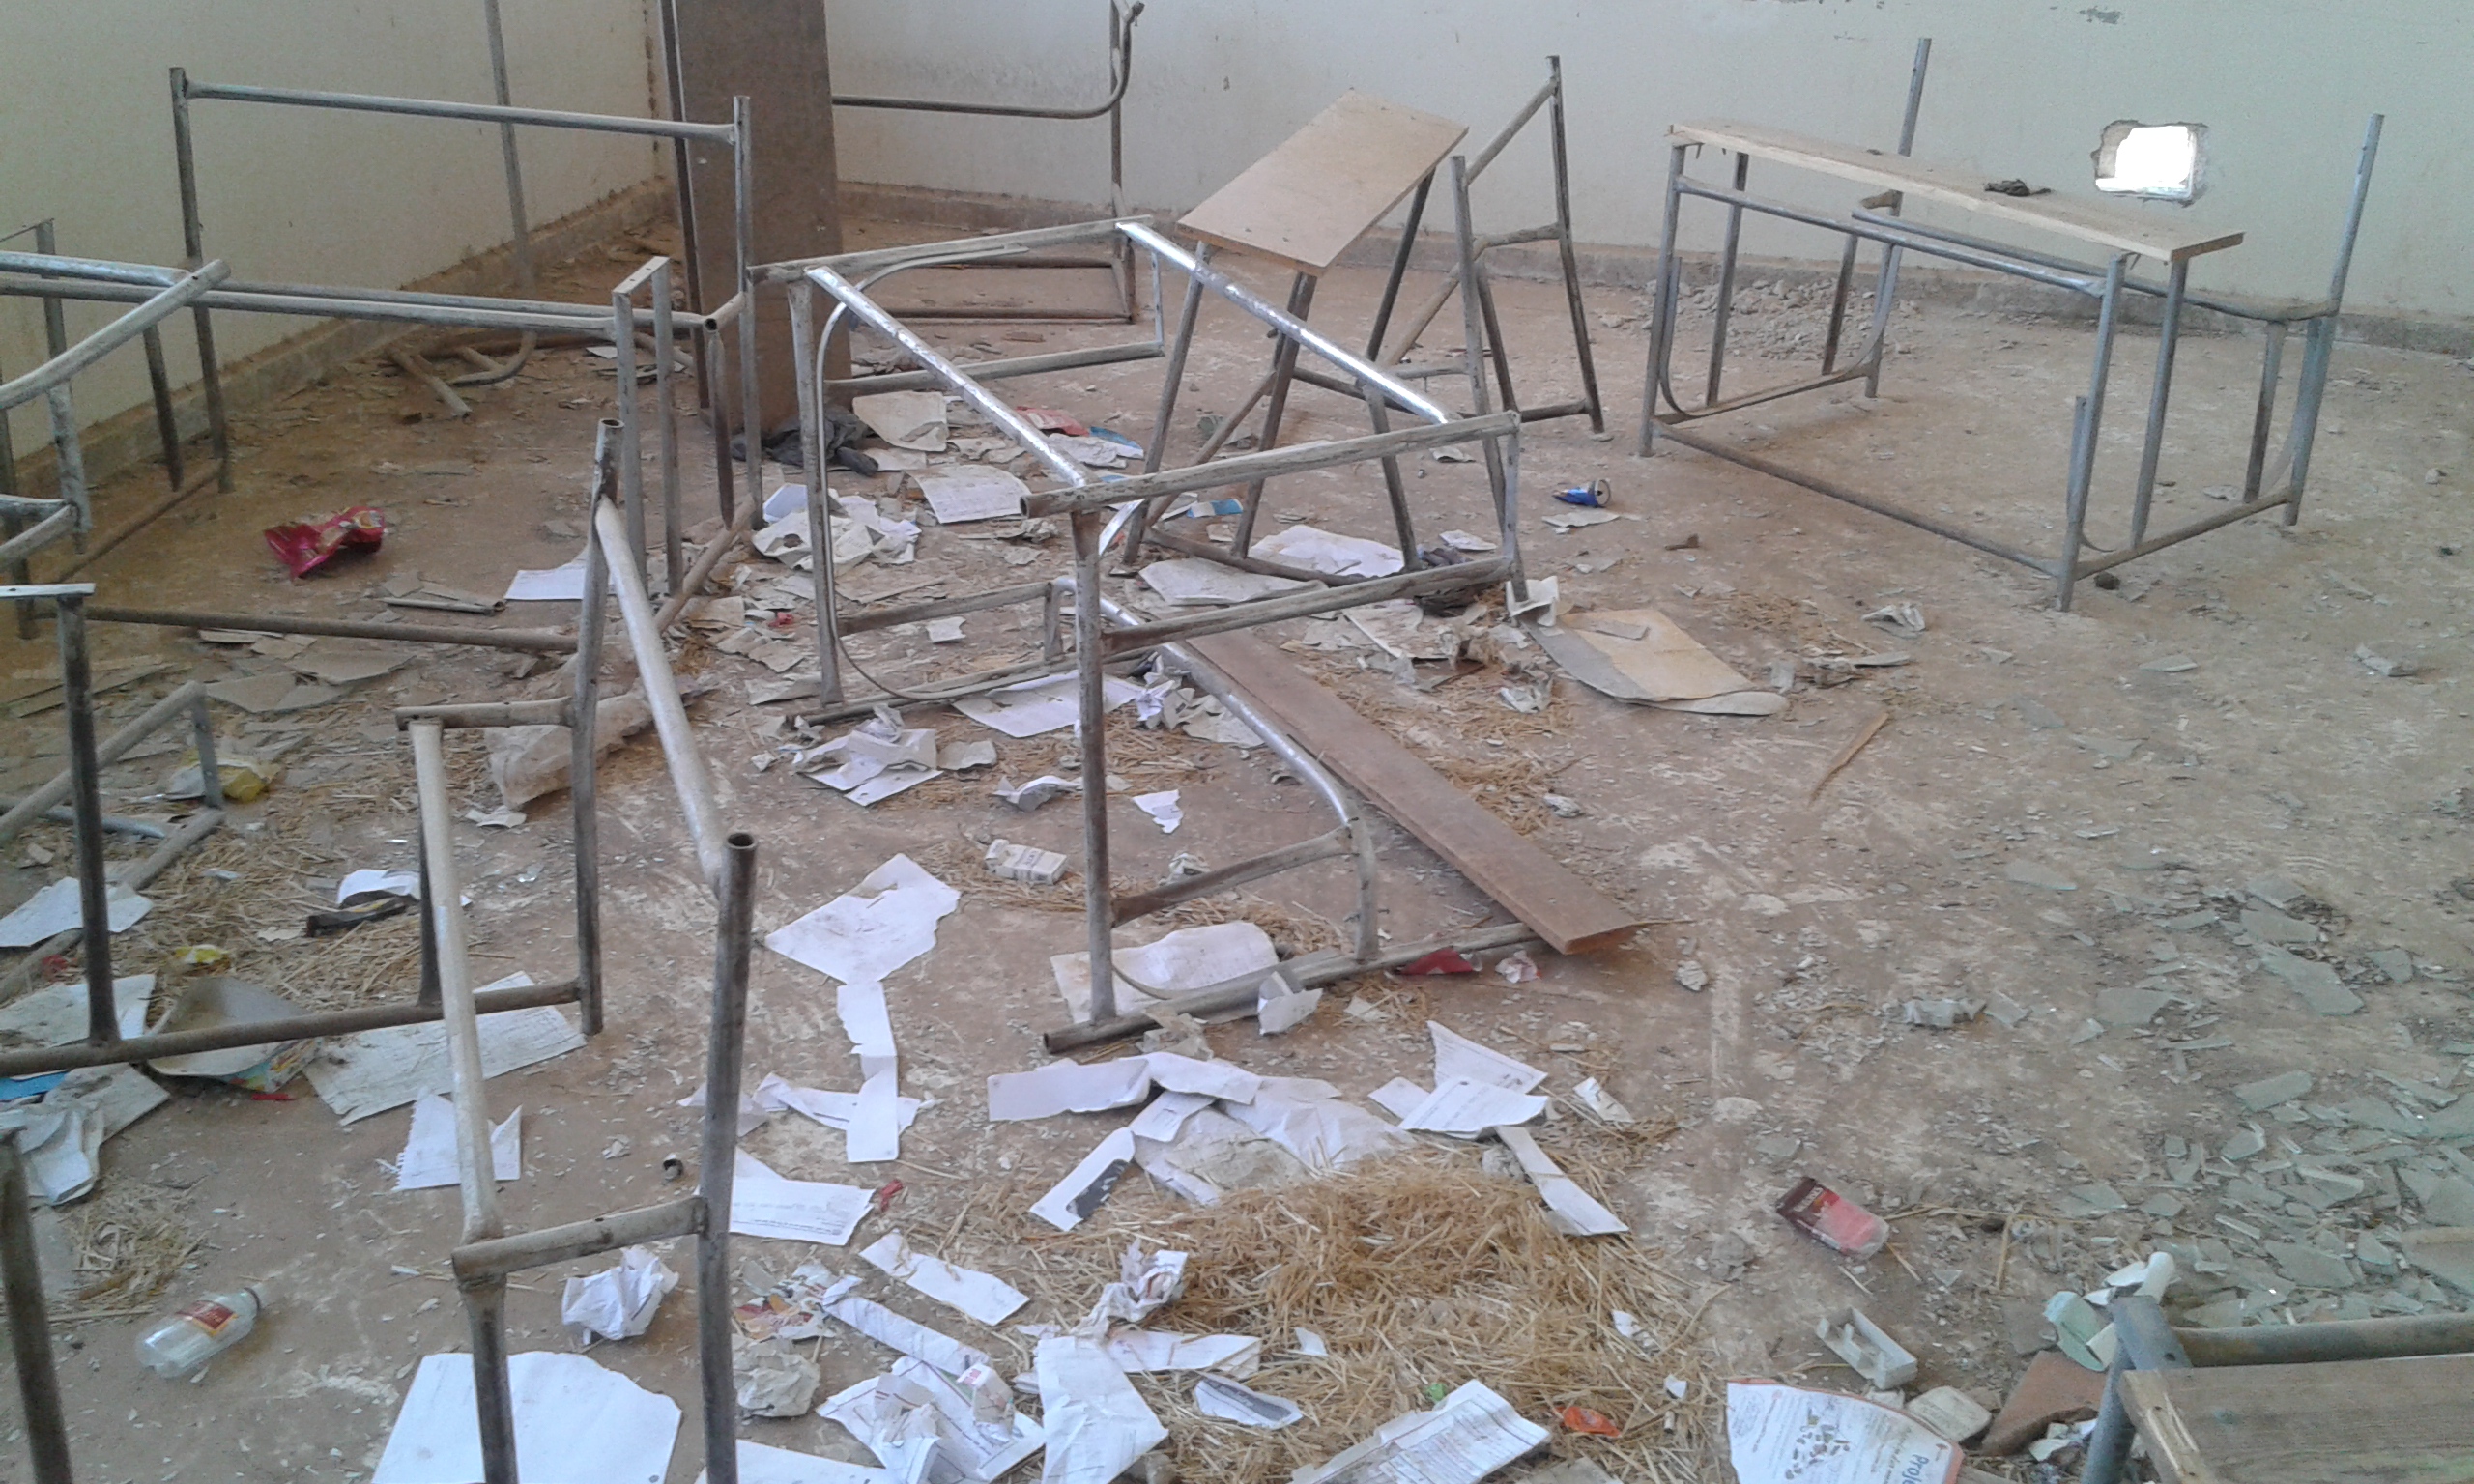 Classrooms have been left empty by the teacher shortage. Photography by Shafan Ibrahim